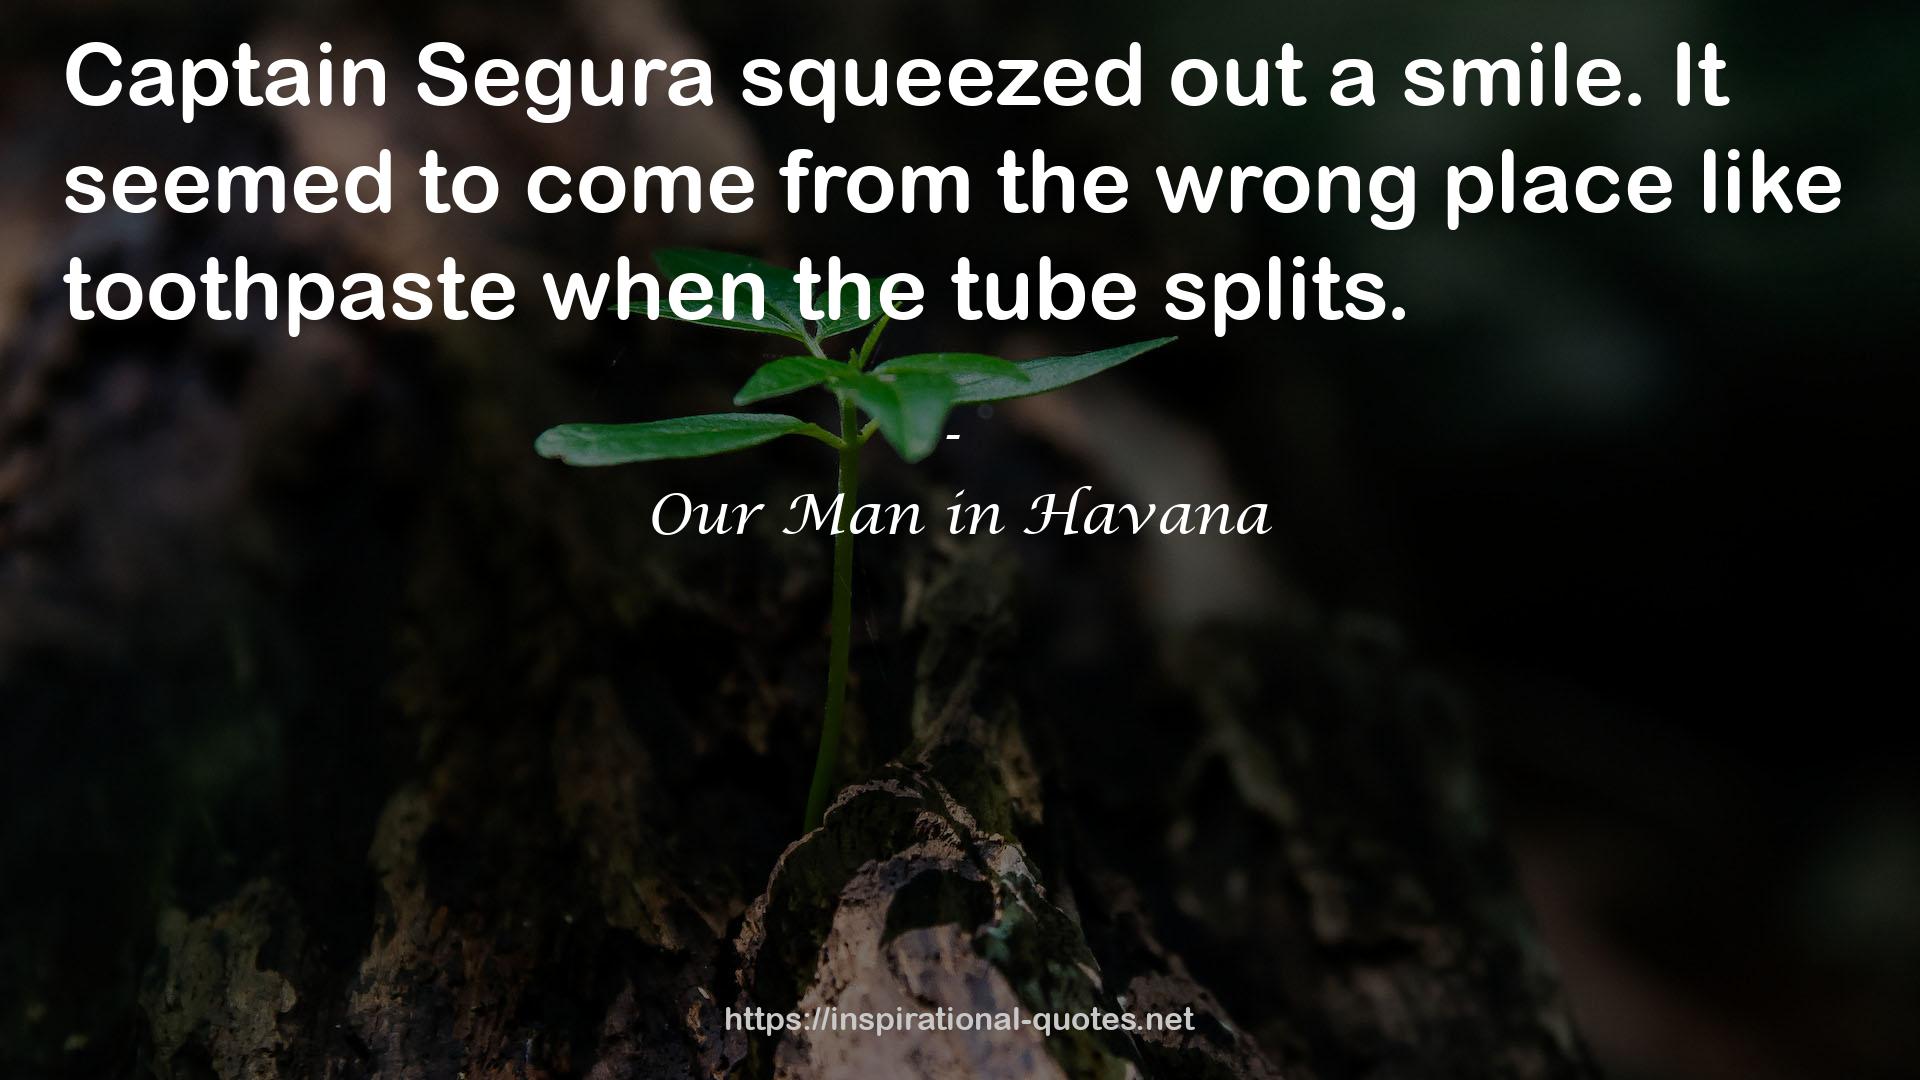 Our Man in Havana QUOTES